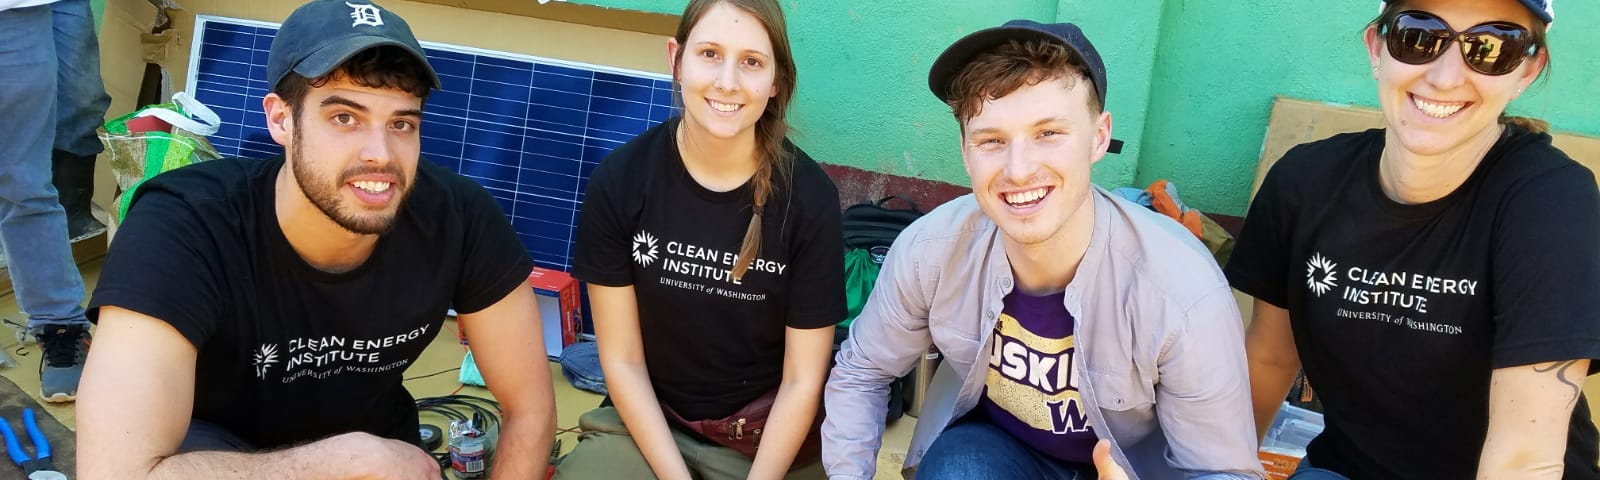 GRID students posing next residential-scale solar energy systems in Guatemala in 2019